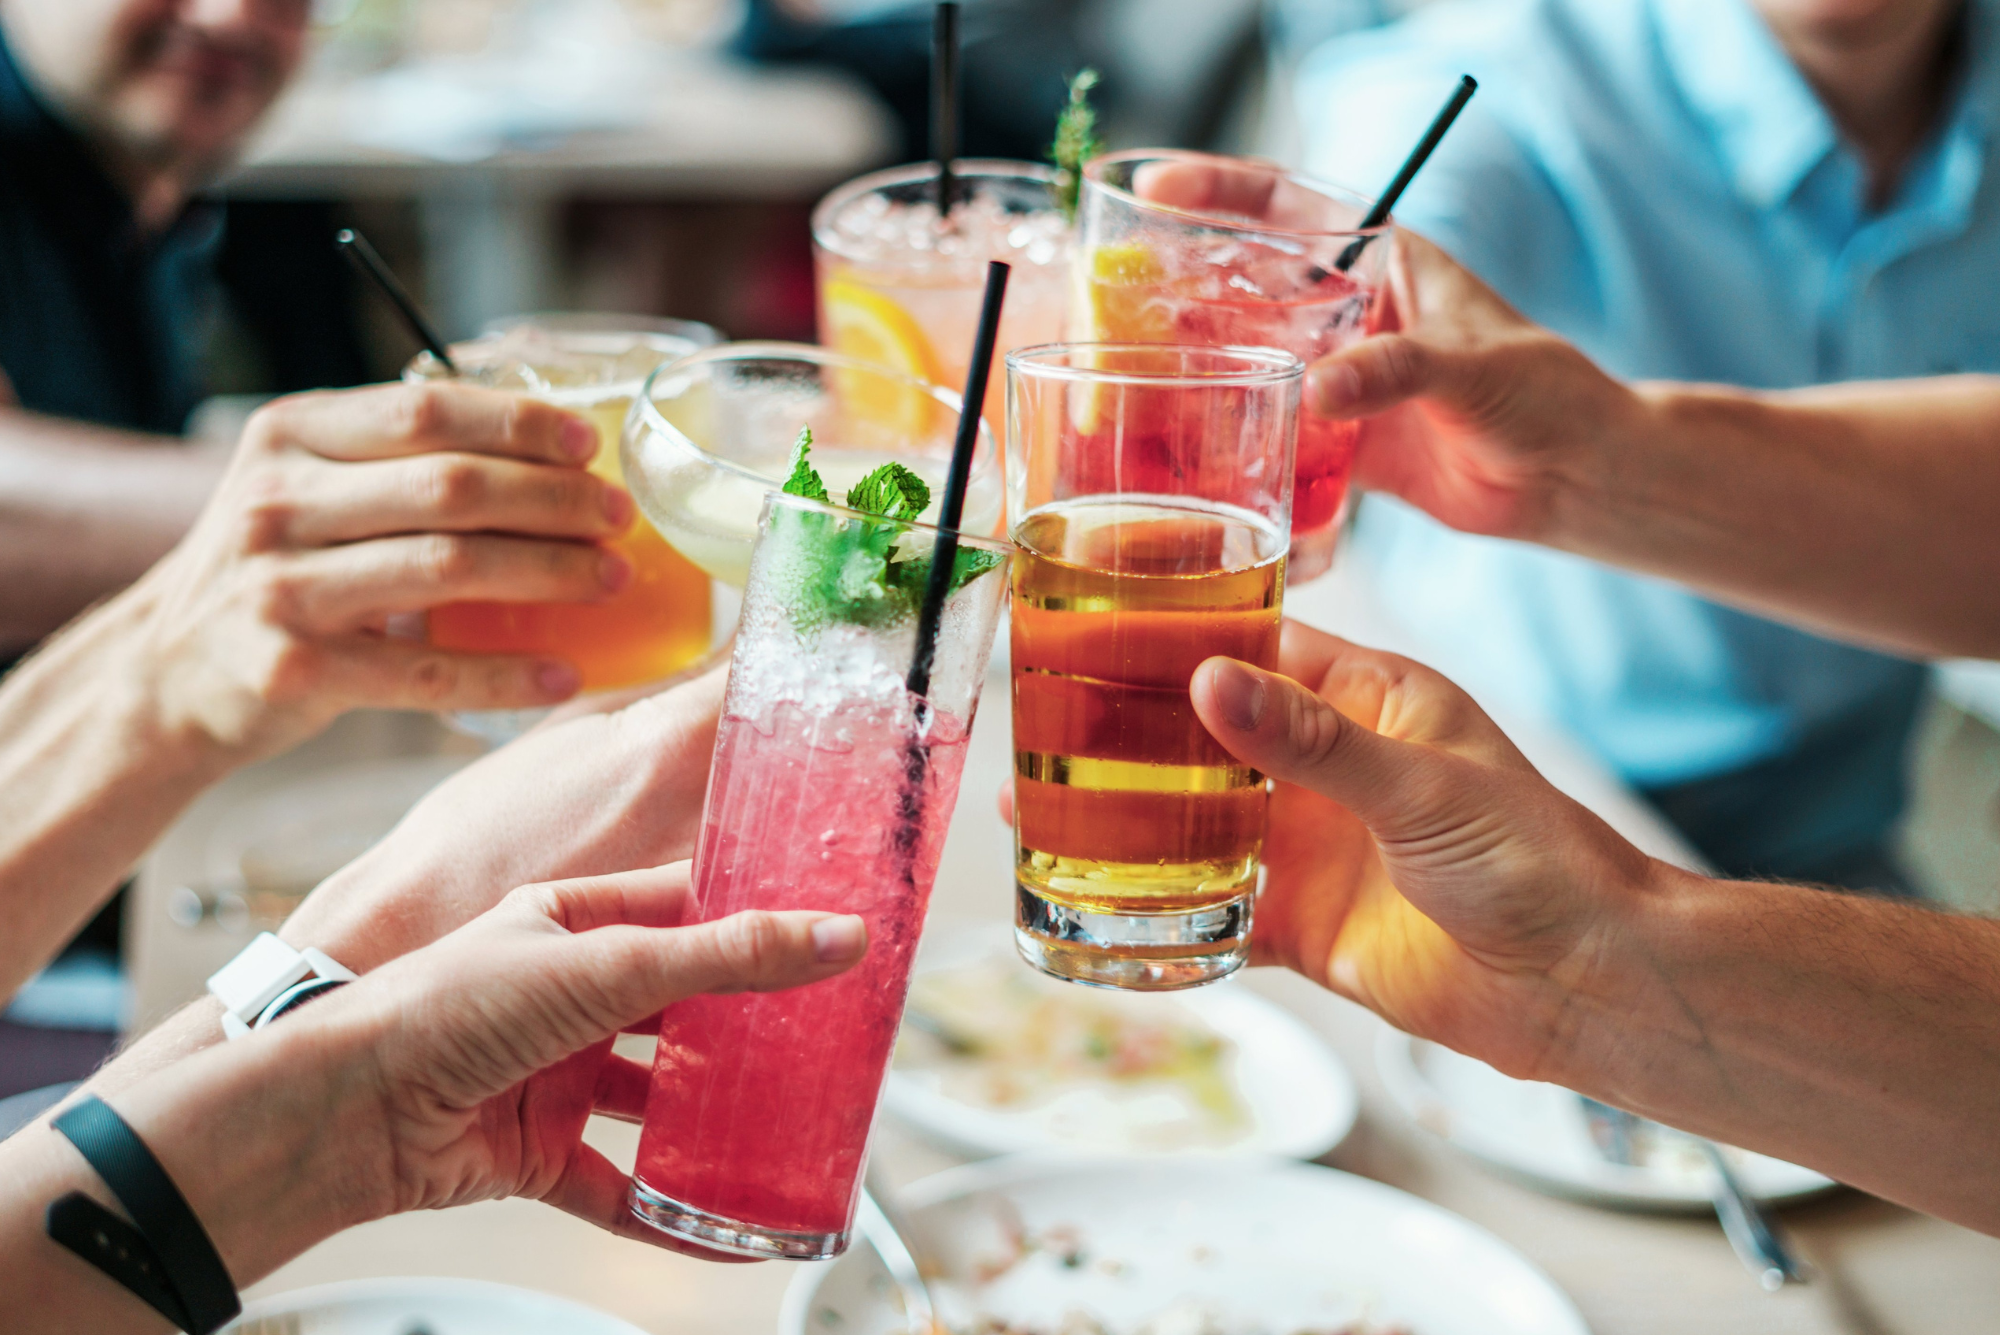 A group of friends clinks their drinks together at a restaurant after learning you can drink after botox.